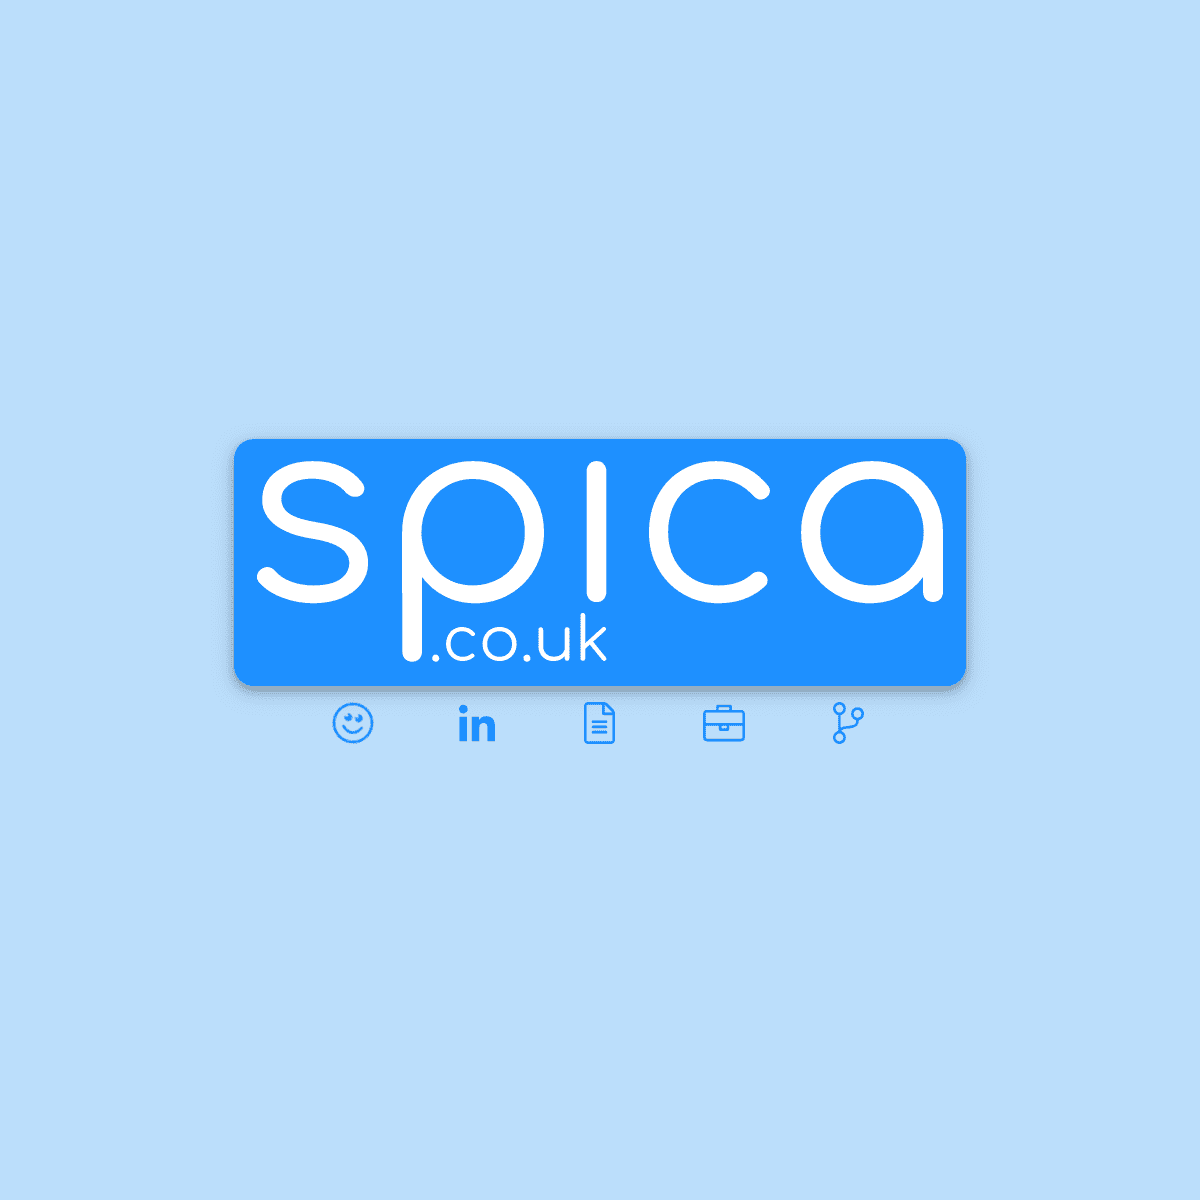 A complete backup of spica.co.uk